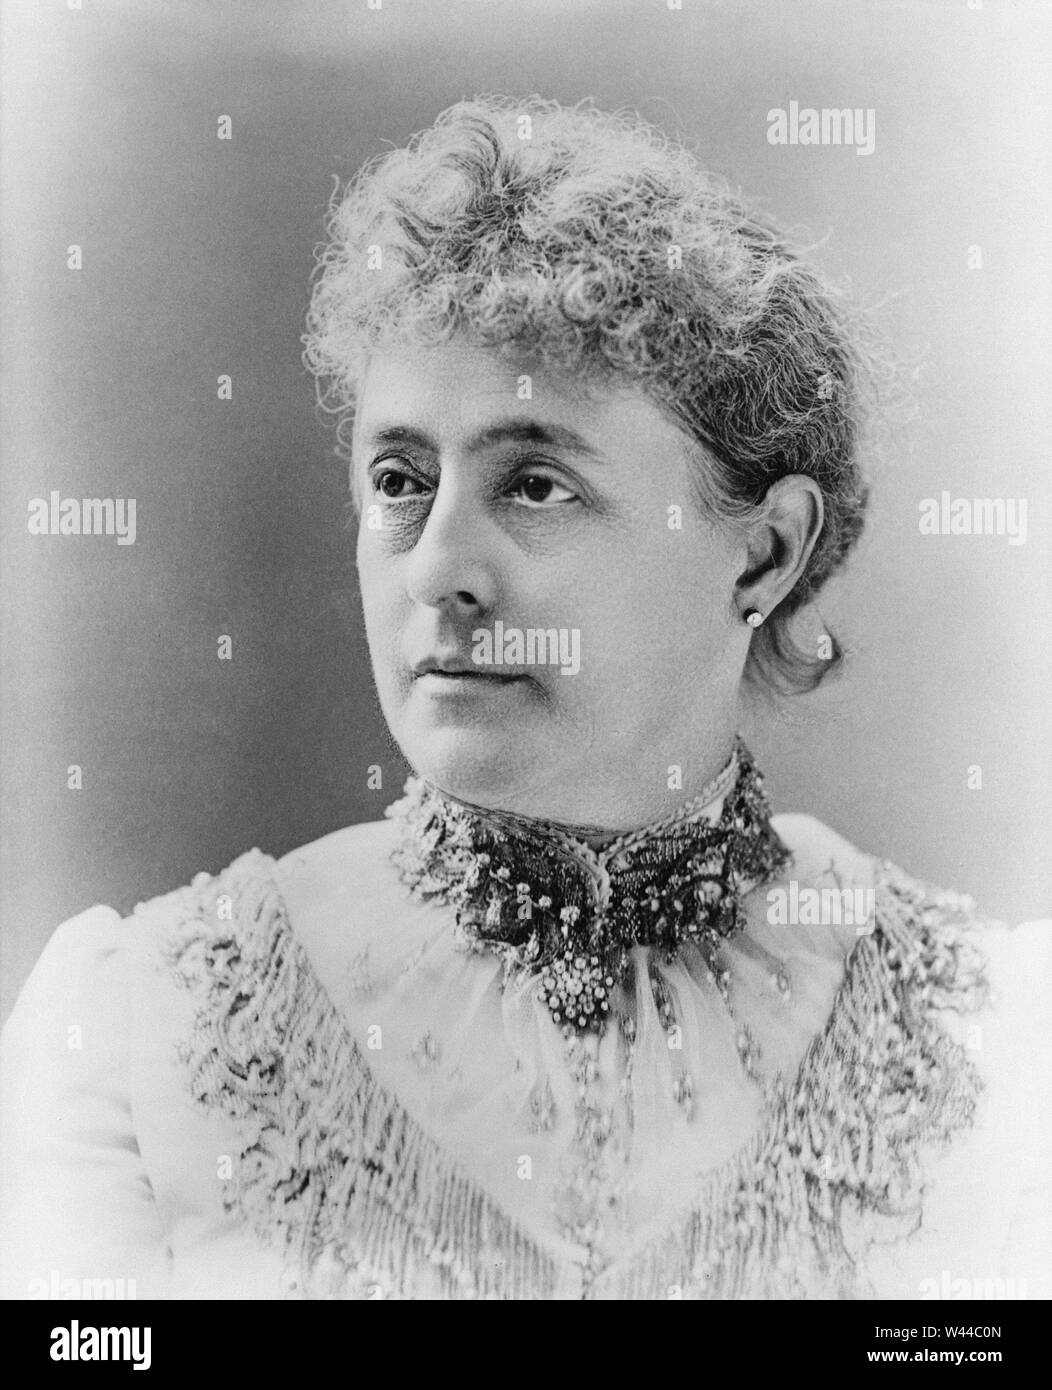 Caroline Harrison (1832-92), First Lady of the United States 1889-92, as Wife of U.S. President Benjamin Harrison, Photograph by Charles Parker, 1889 Stock Photo